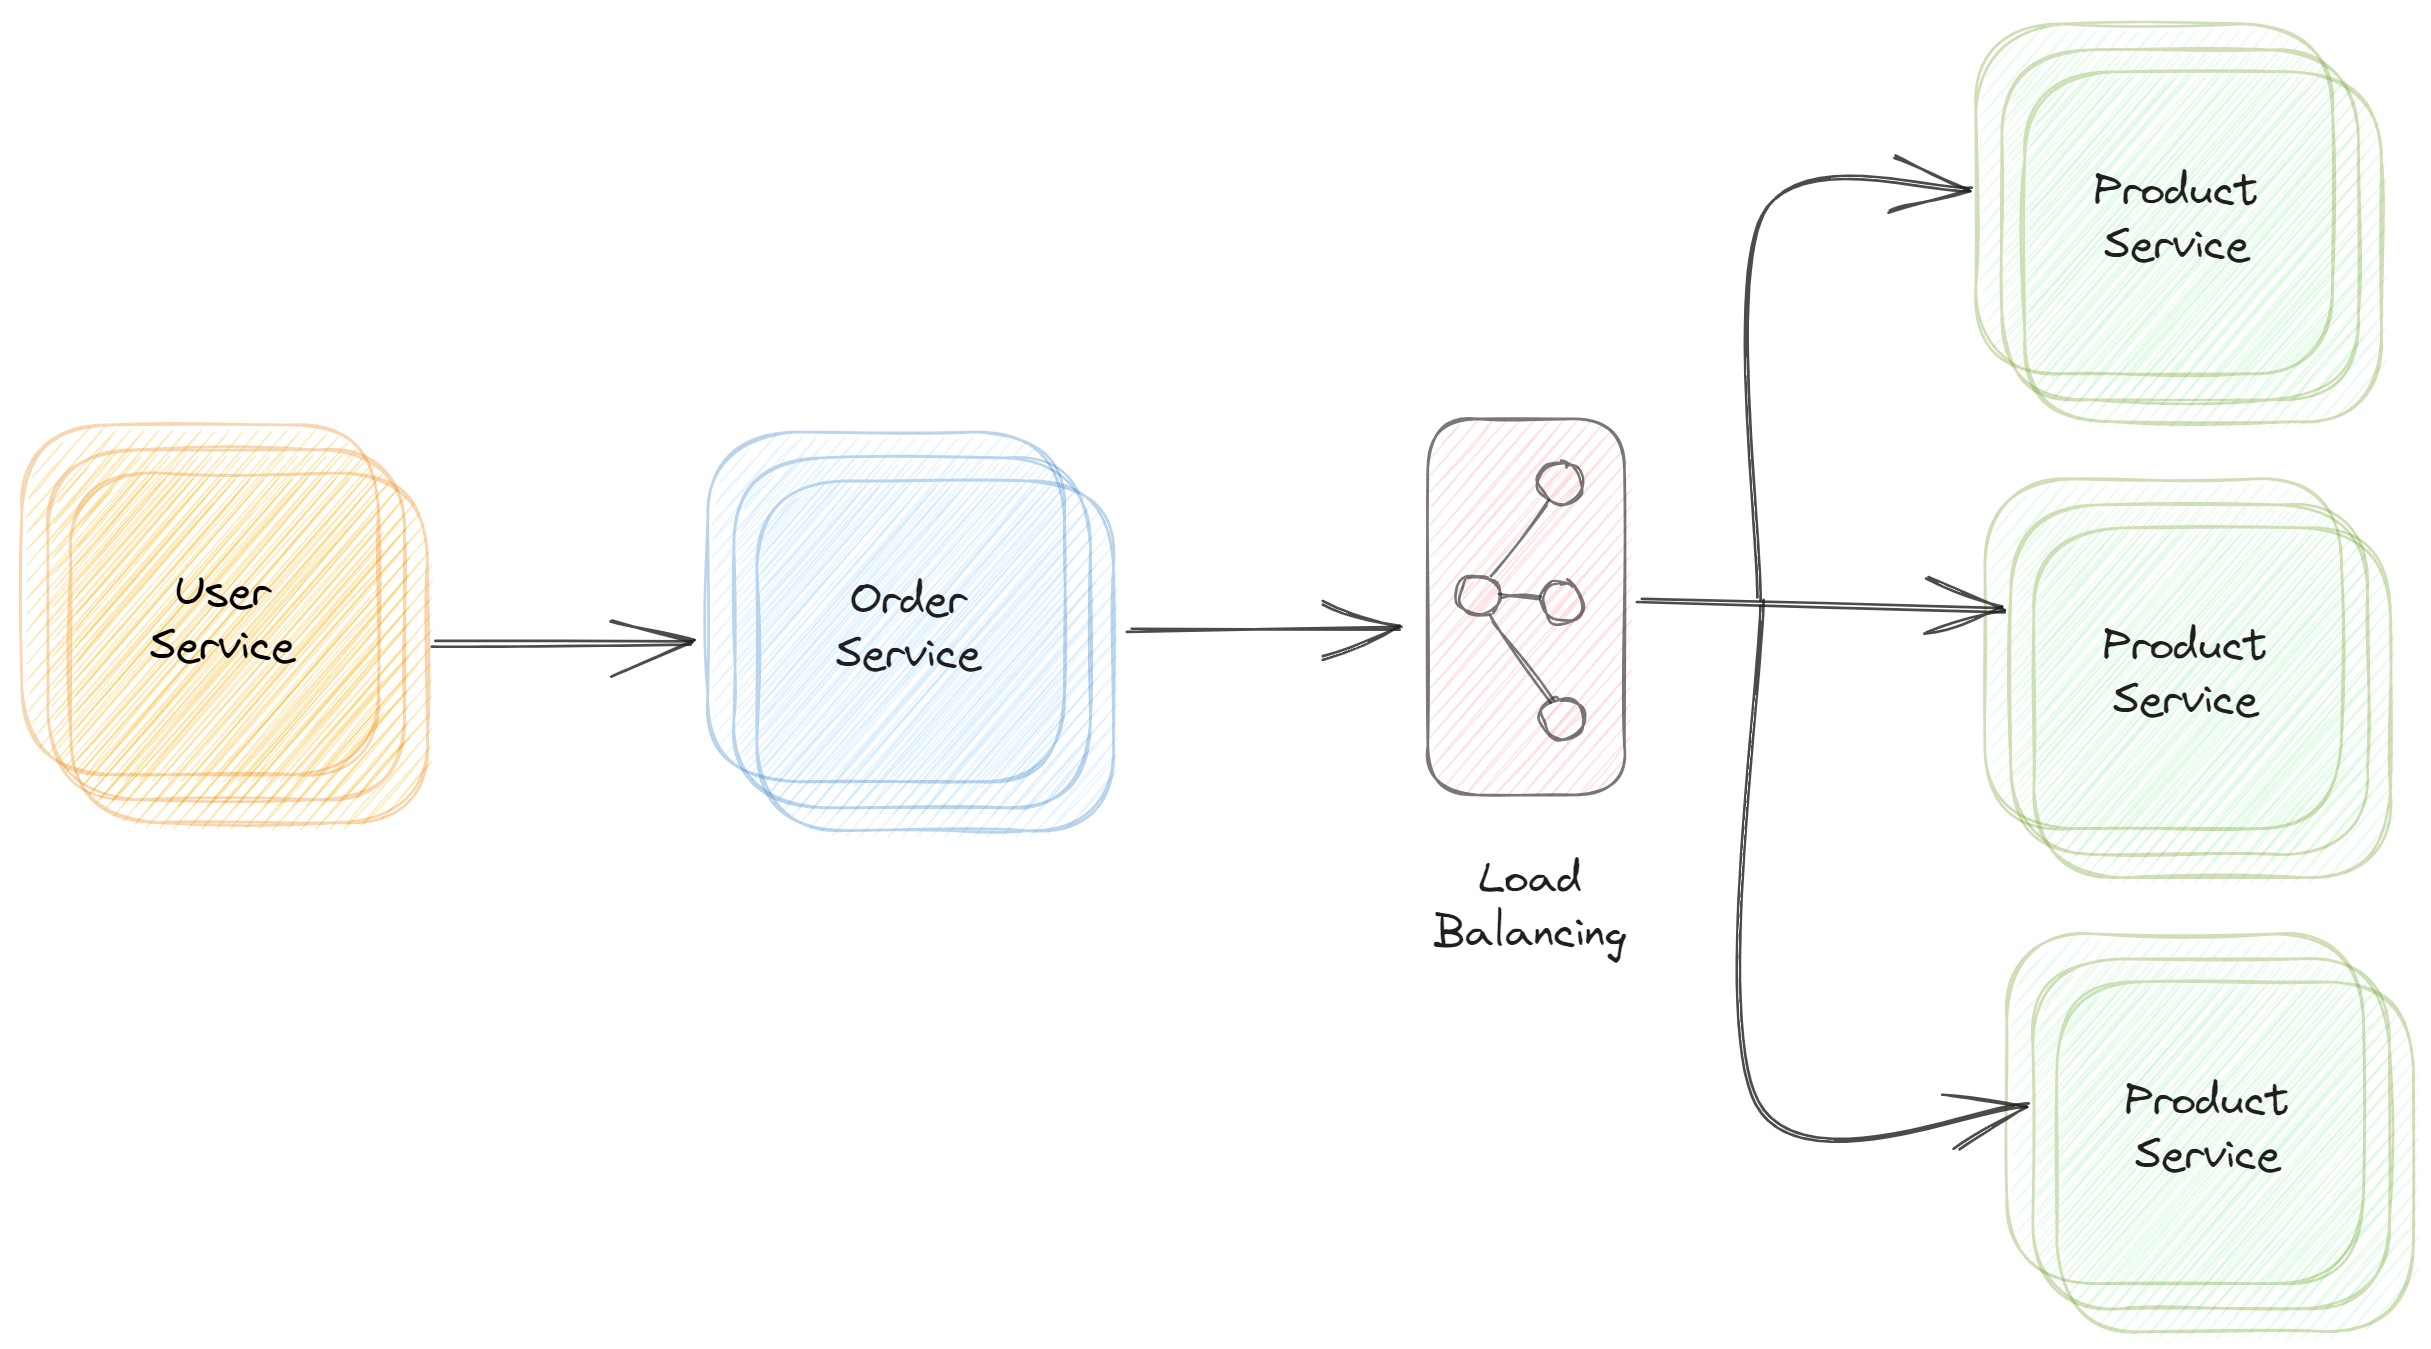 Diagram of Microservice organization with horizontal scaling.

